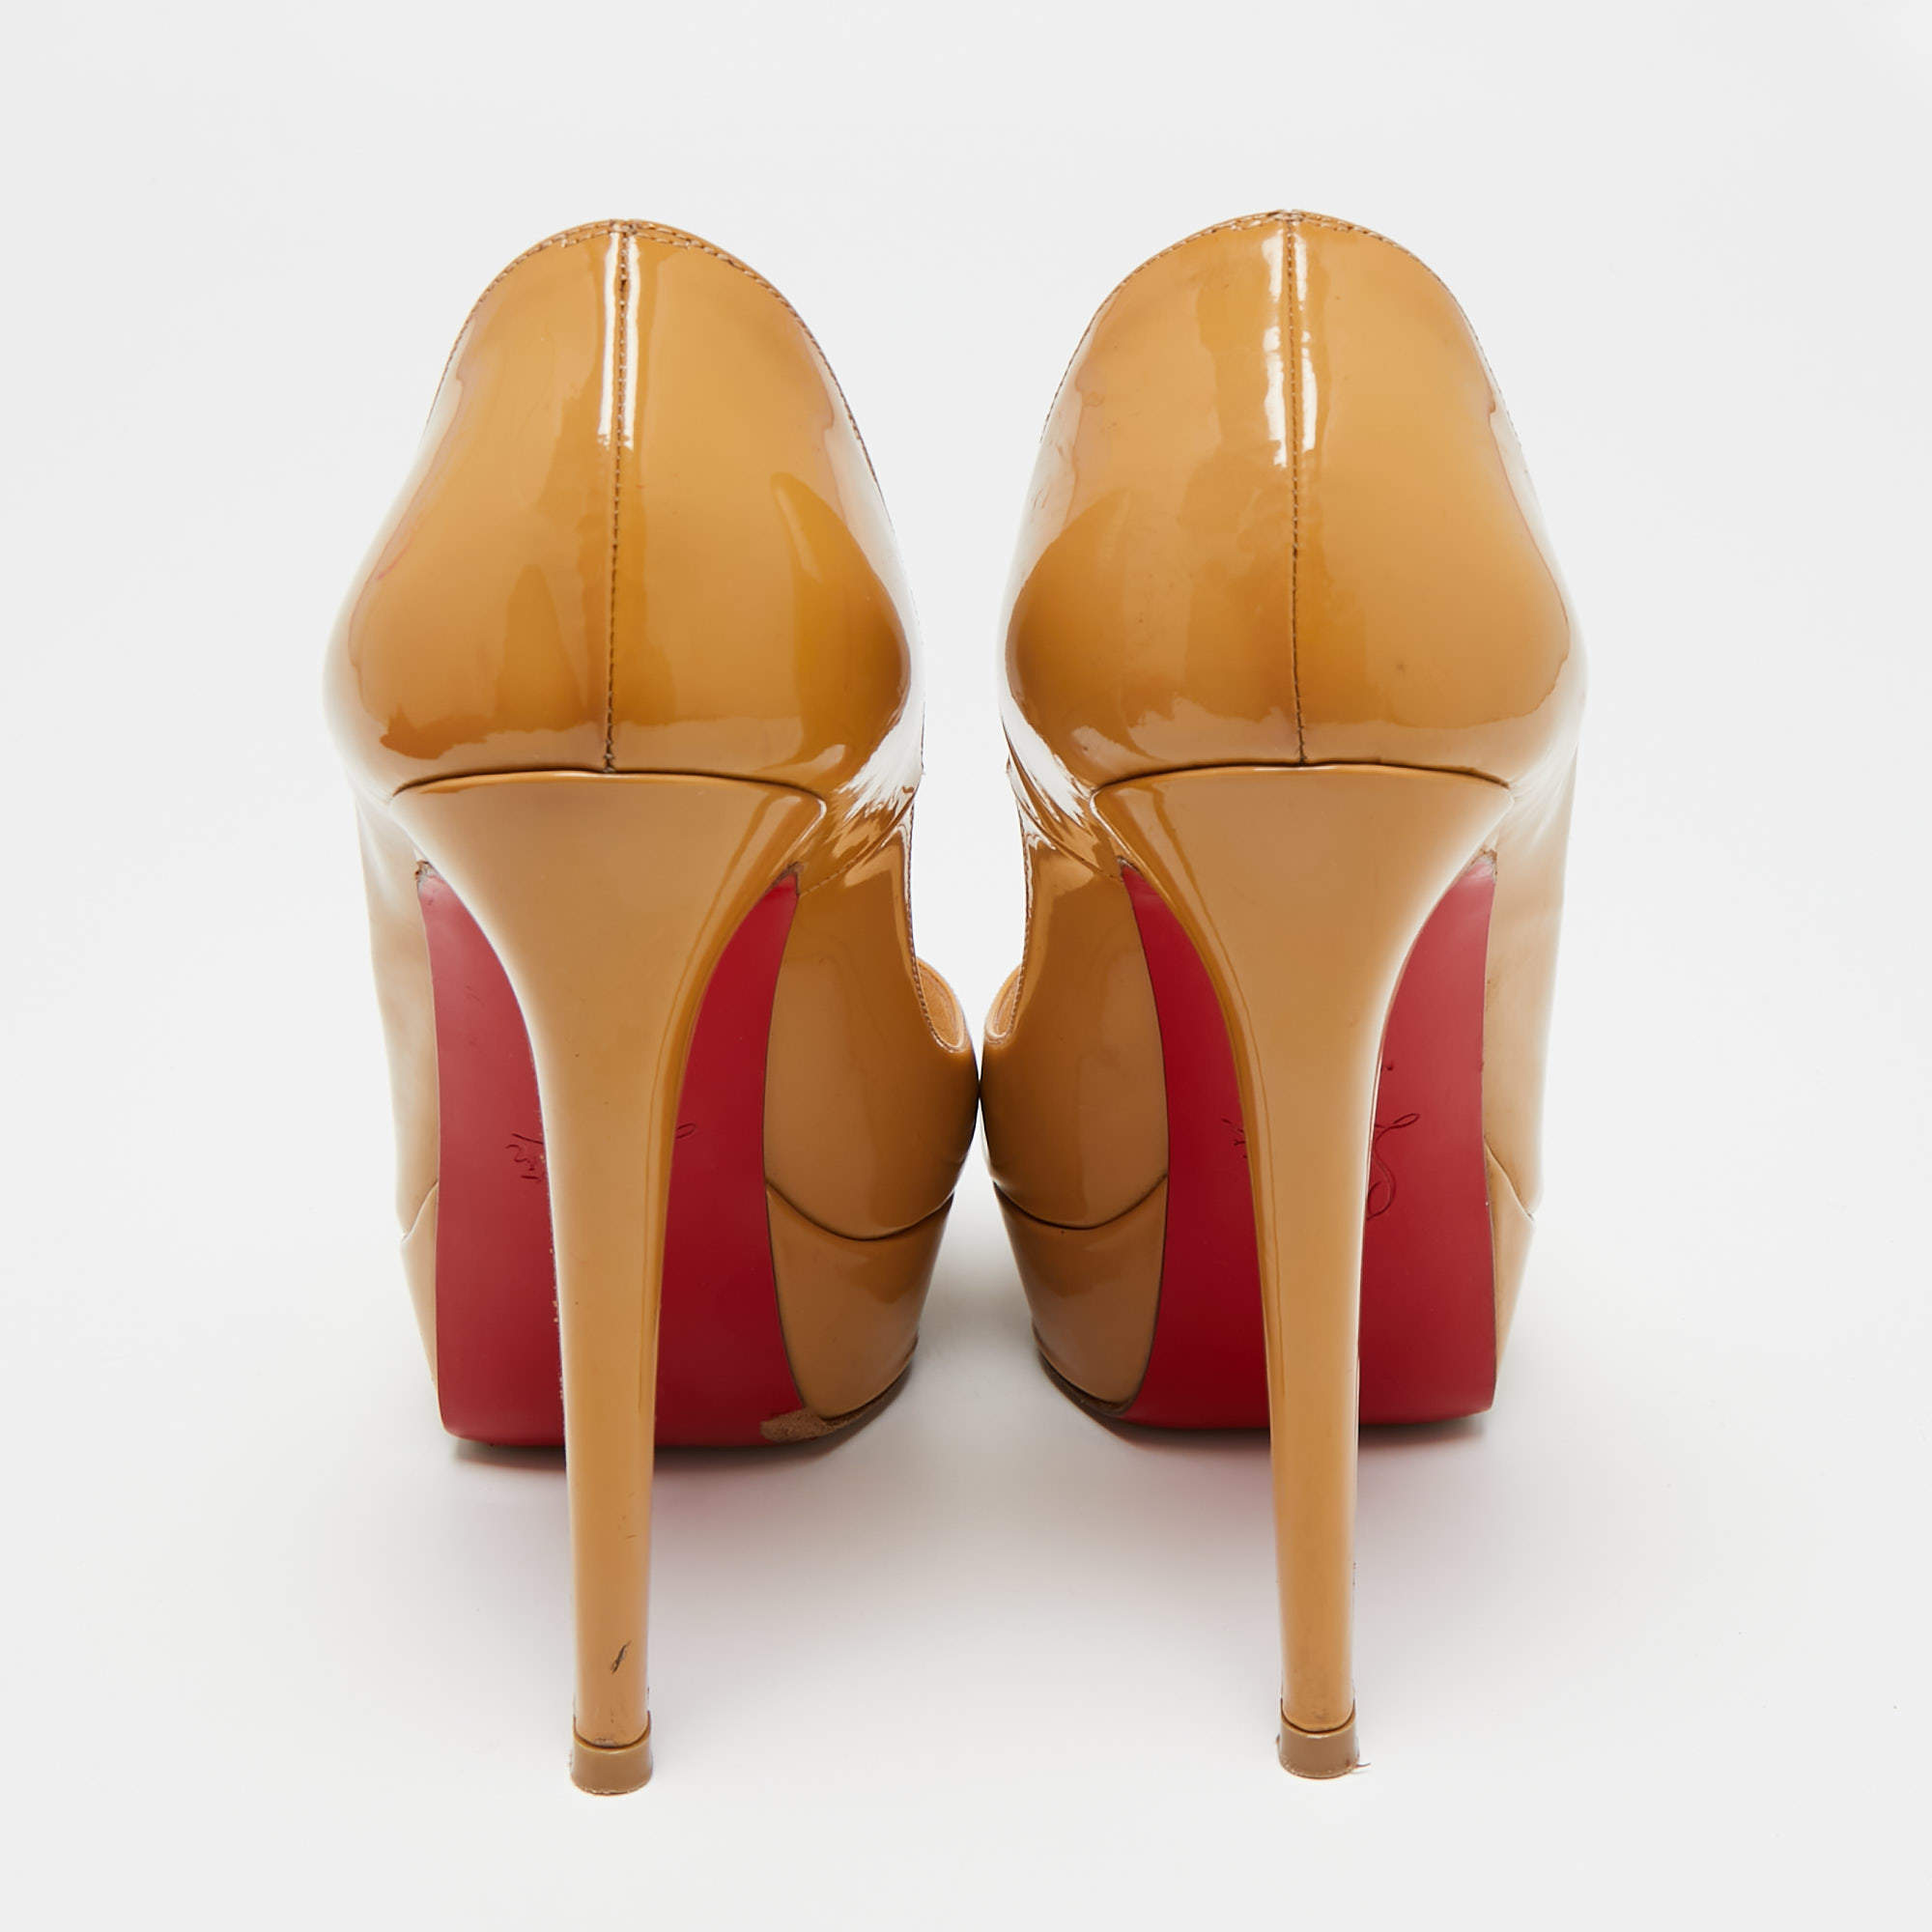 Patent leather heels Christian Louboutin Beige size 38.5 EU in Patent  leather - 31360496